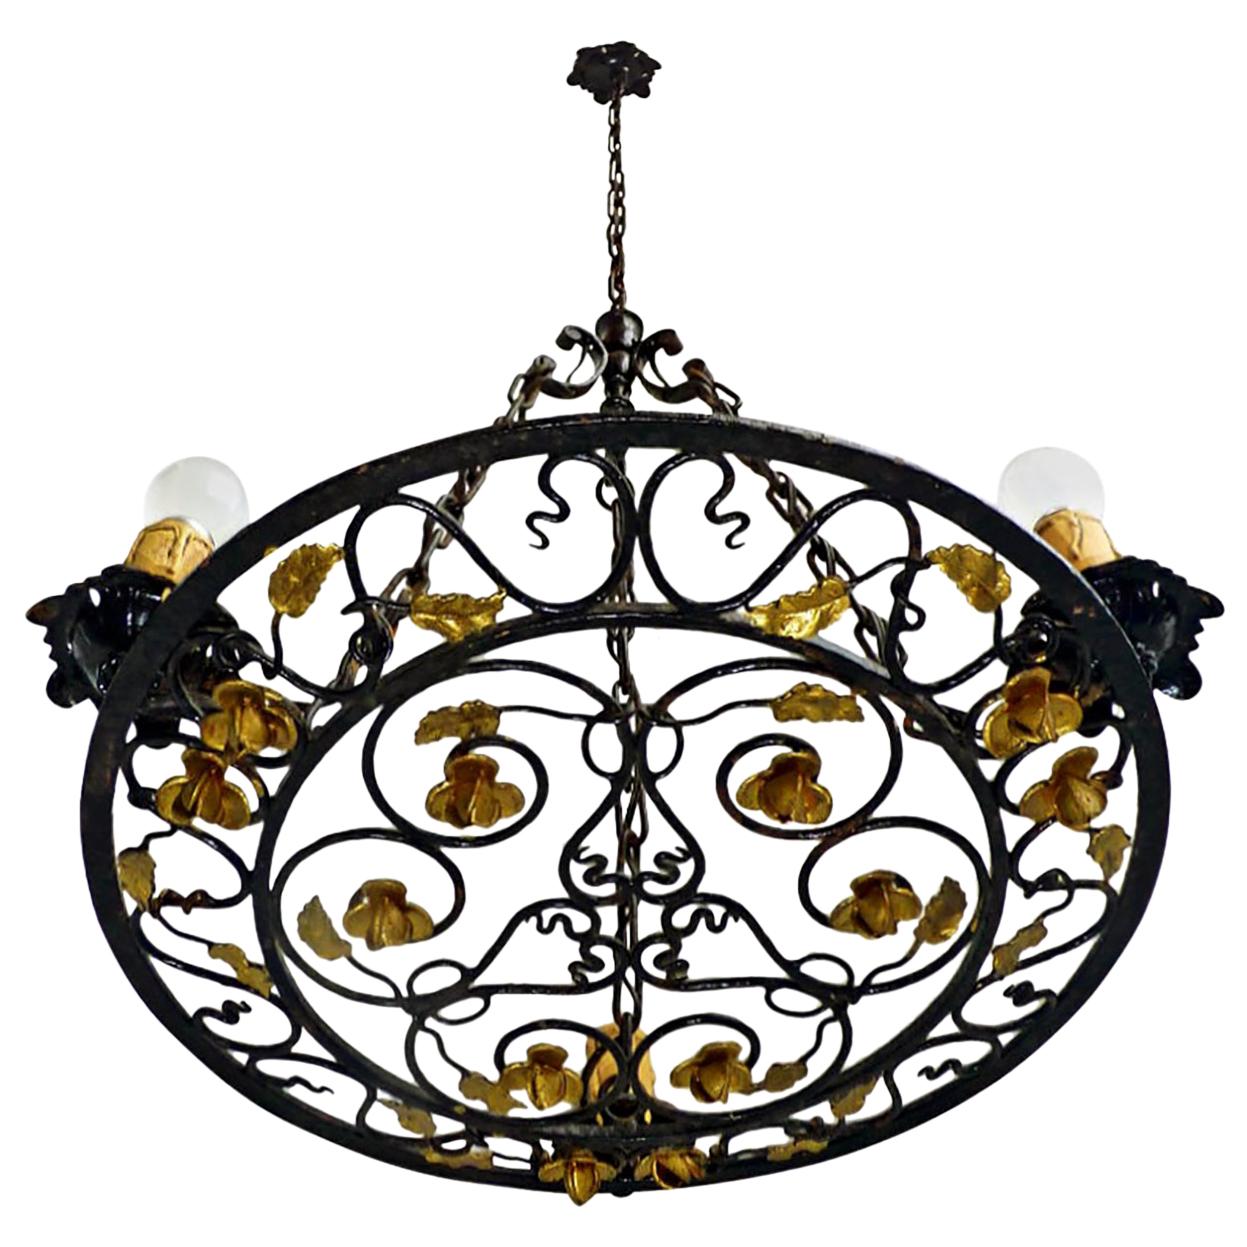 French Art Nouveau, Art Deco Round Gilt Hand Forged Scrolled Iron Chandelier